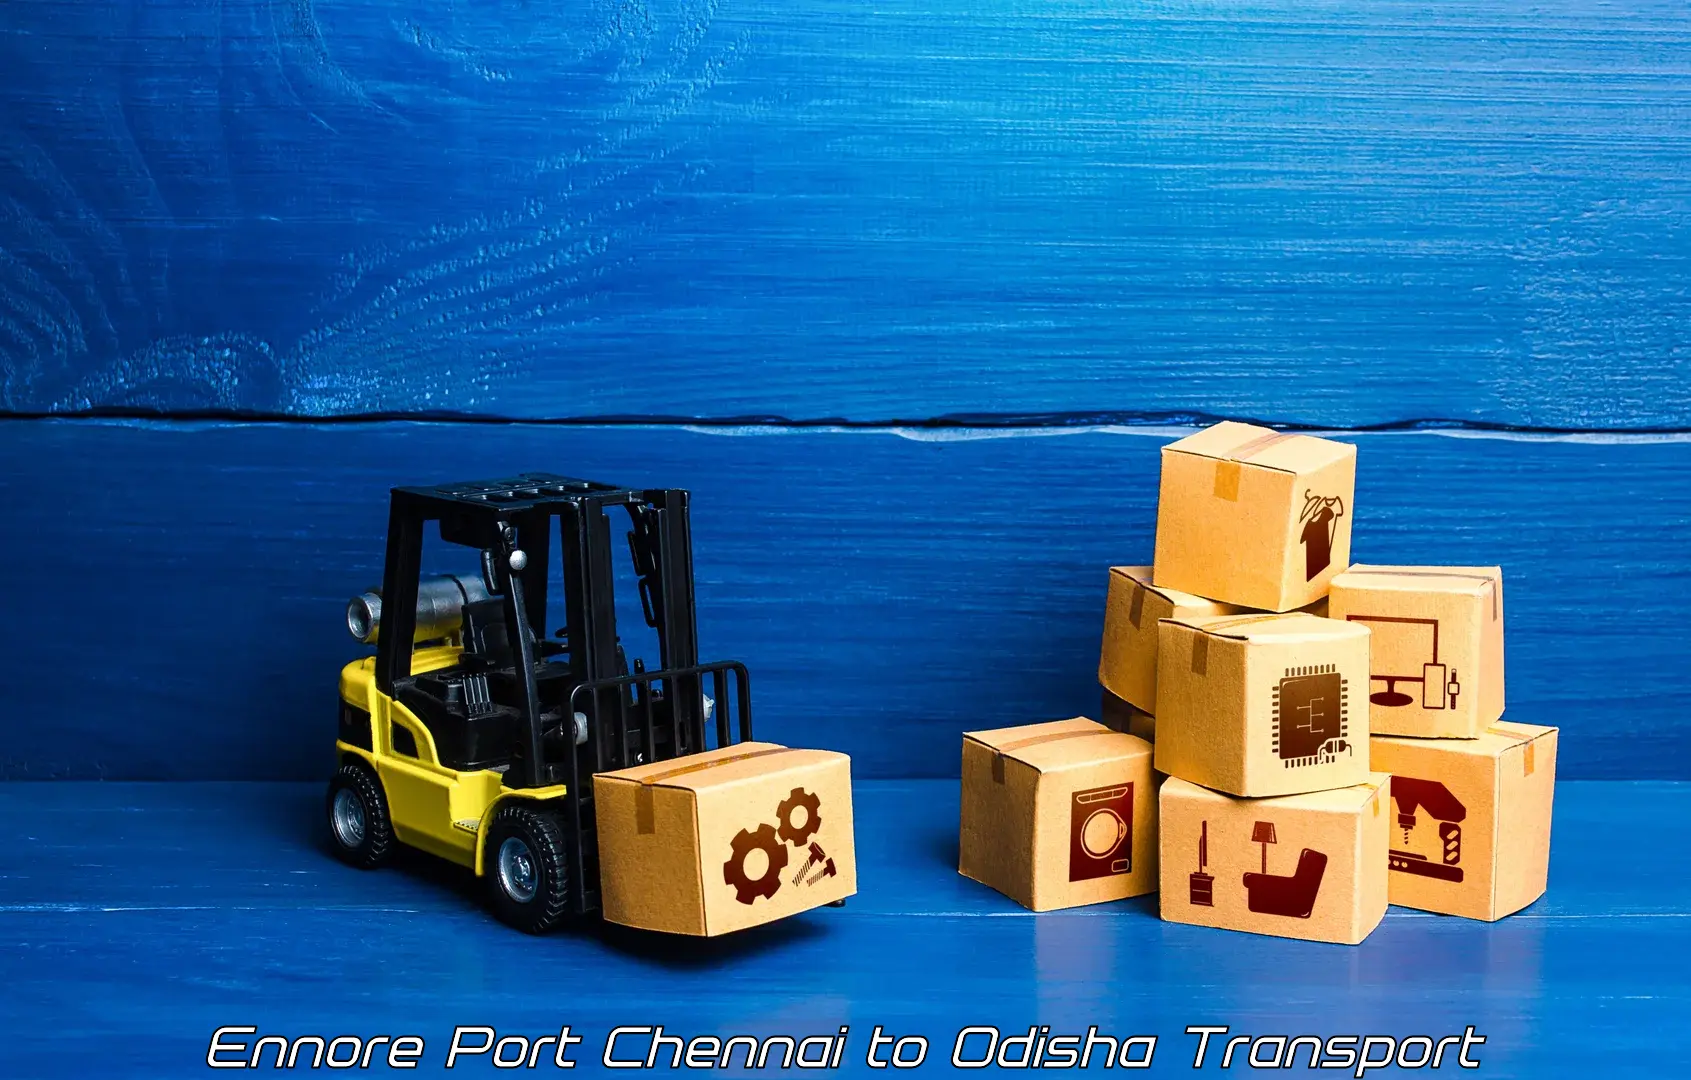 Express transport services Ennore Port Chennai to Cuttack